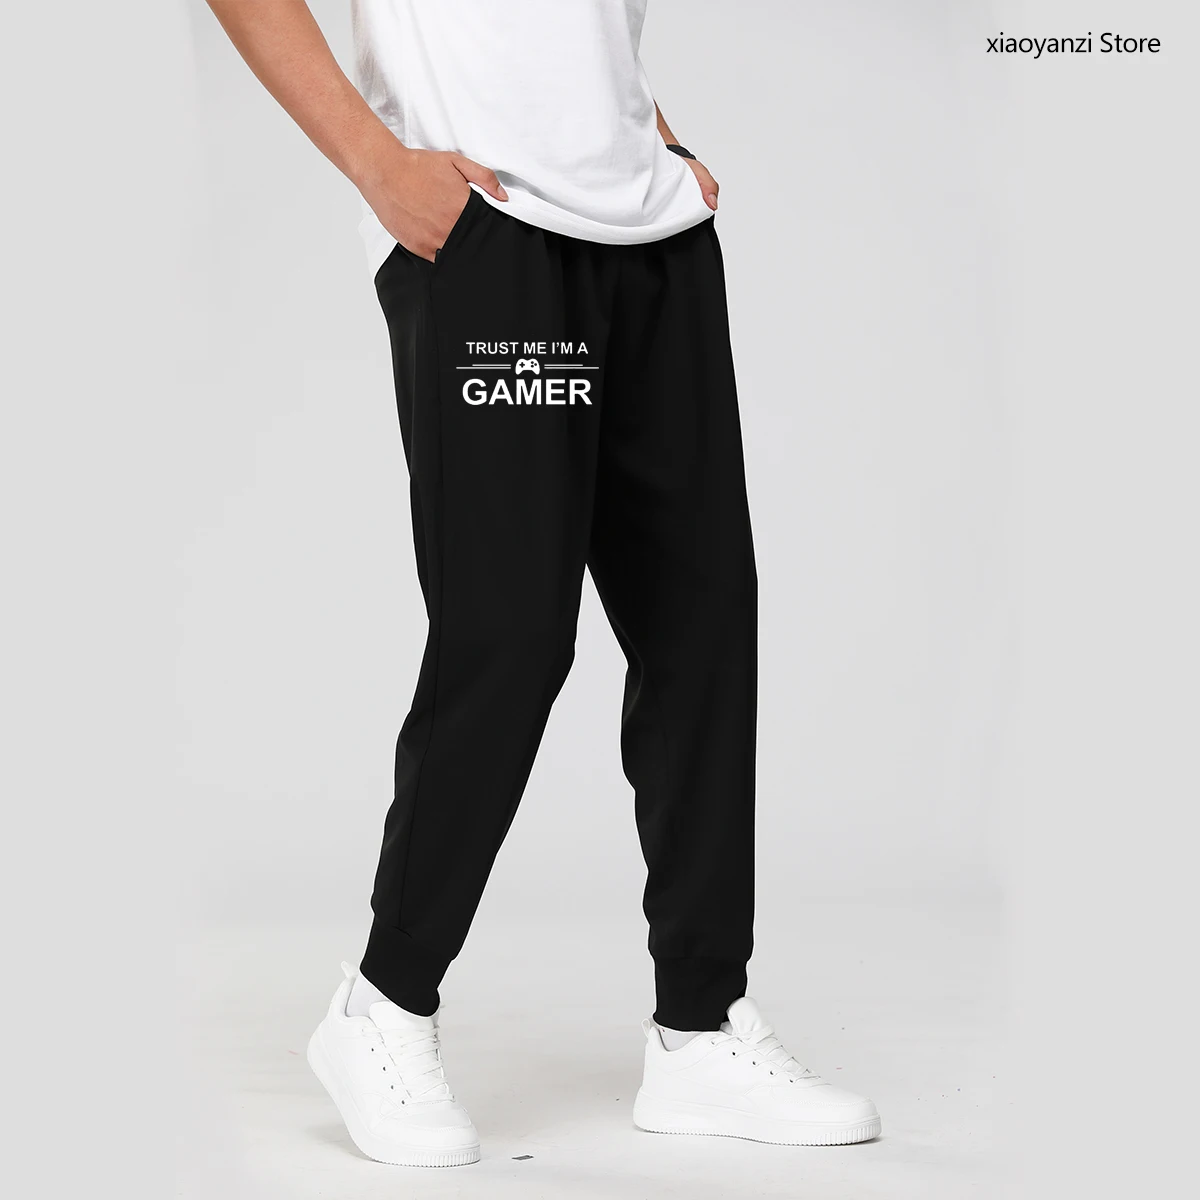 

Trust me I'm a gamer funny printed mens Sweatpants computer geek Sports Long Pants homme Male Fitness Trousers OU-488-09